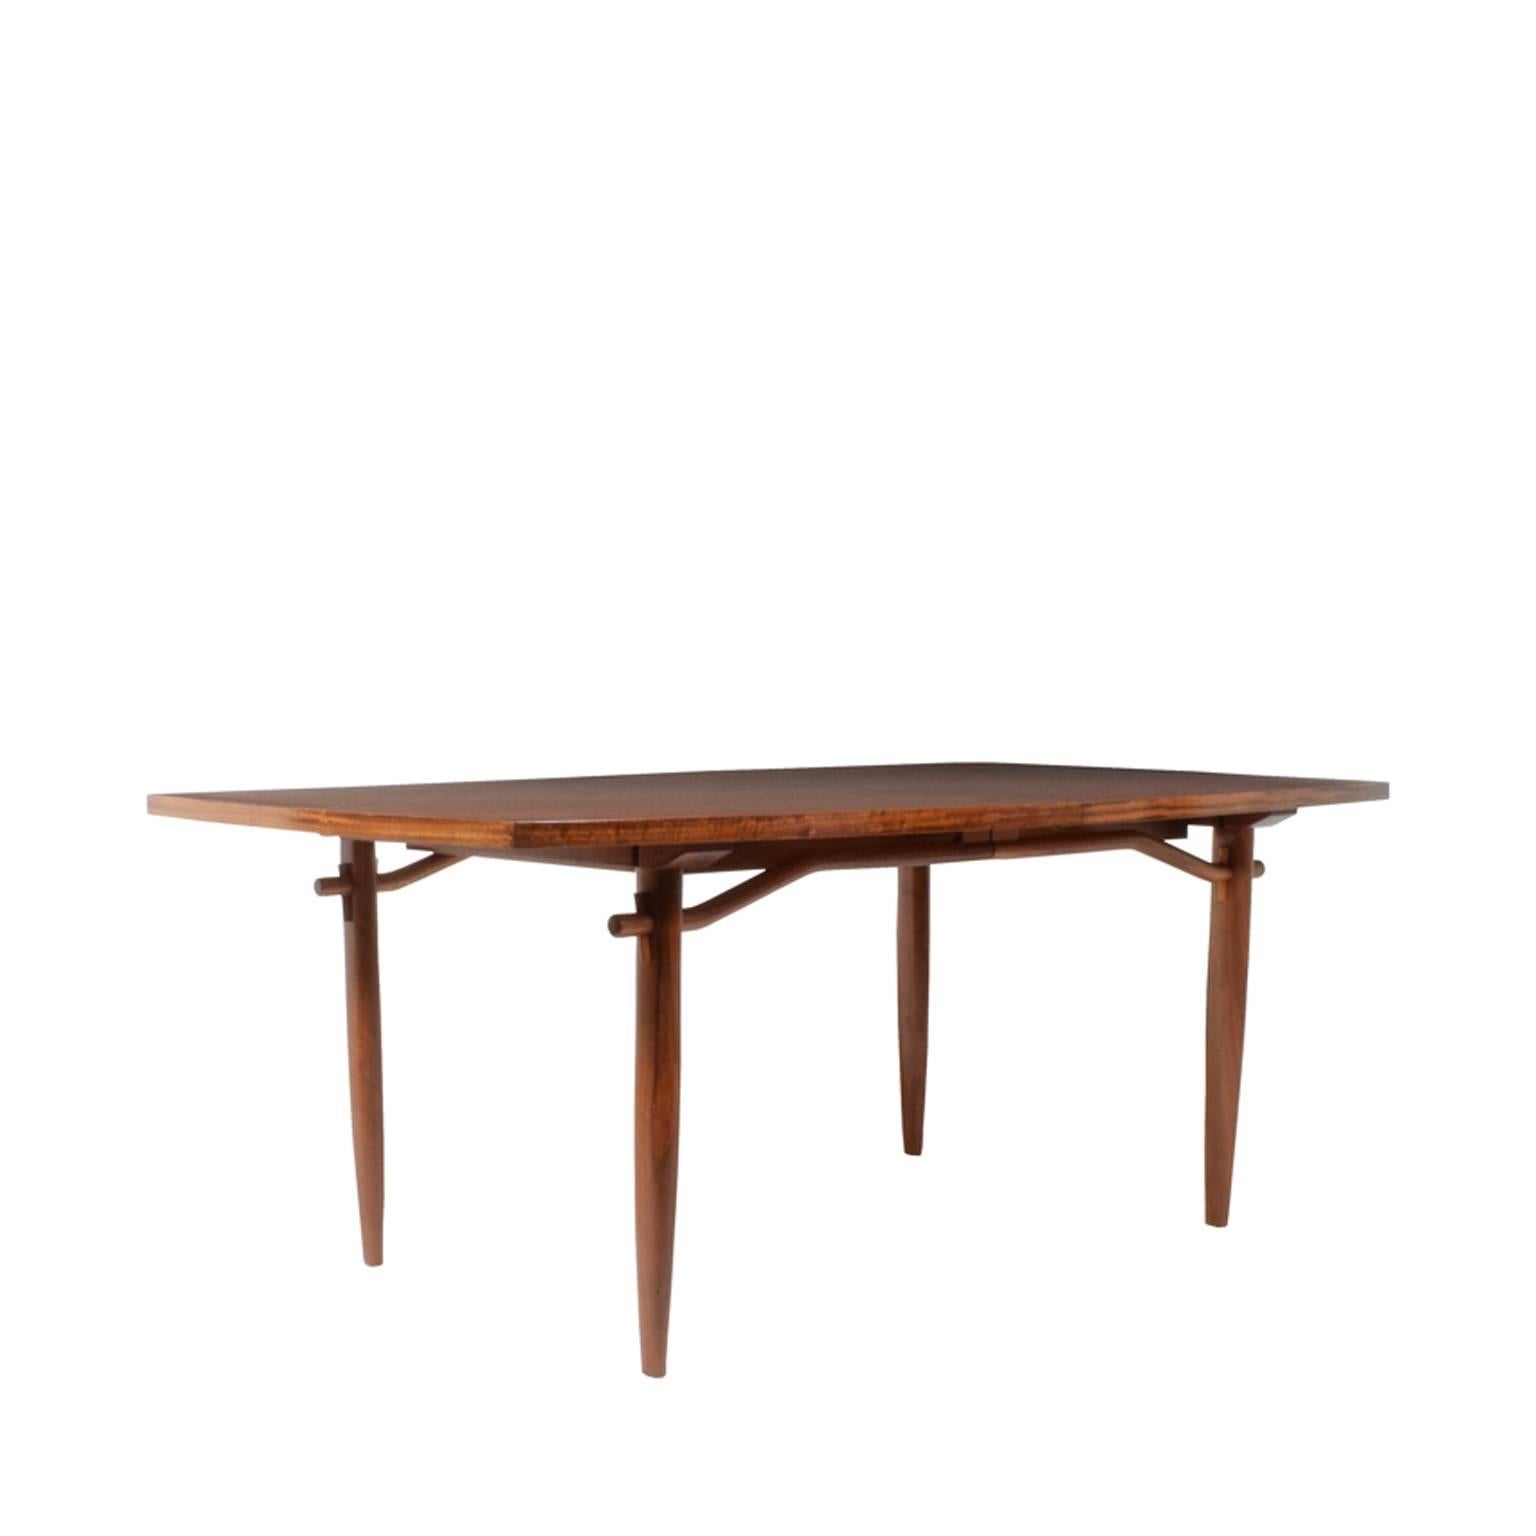 Walnut dining table from Origins group; designed by George Nakashima for Widdicomb in the 1950s. Measure: One 22